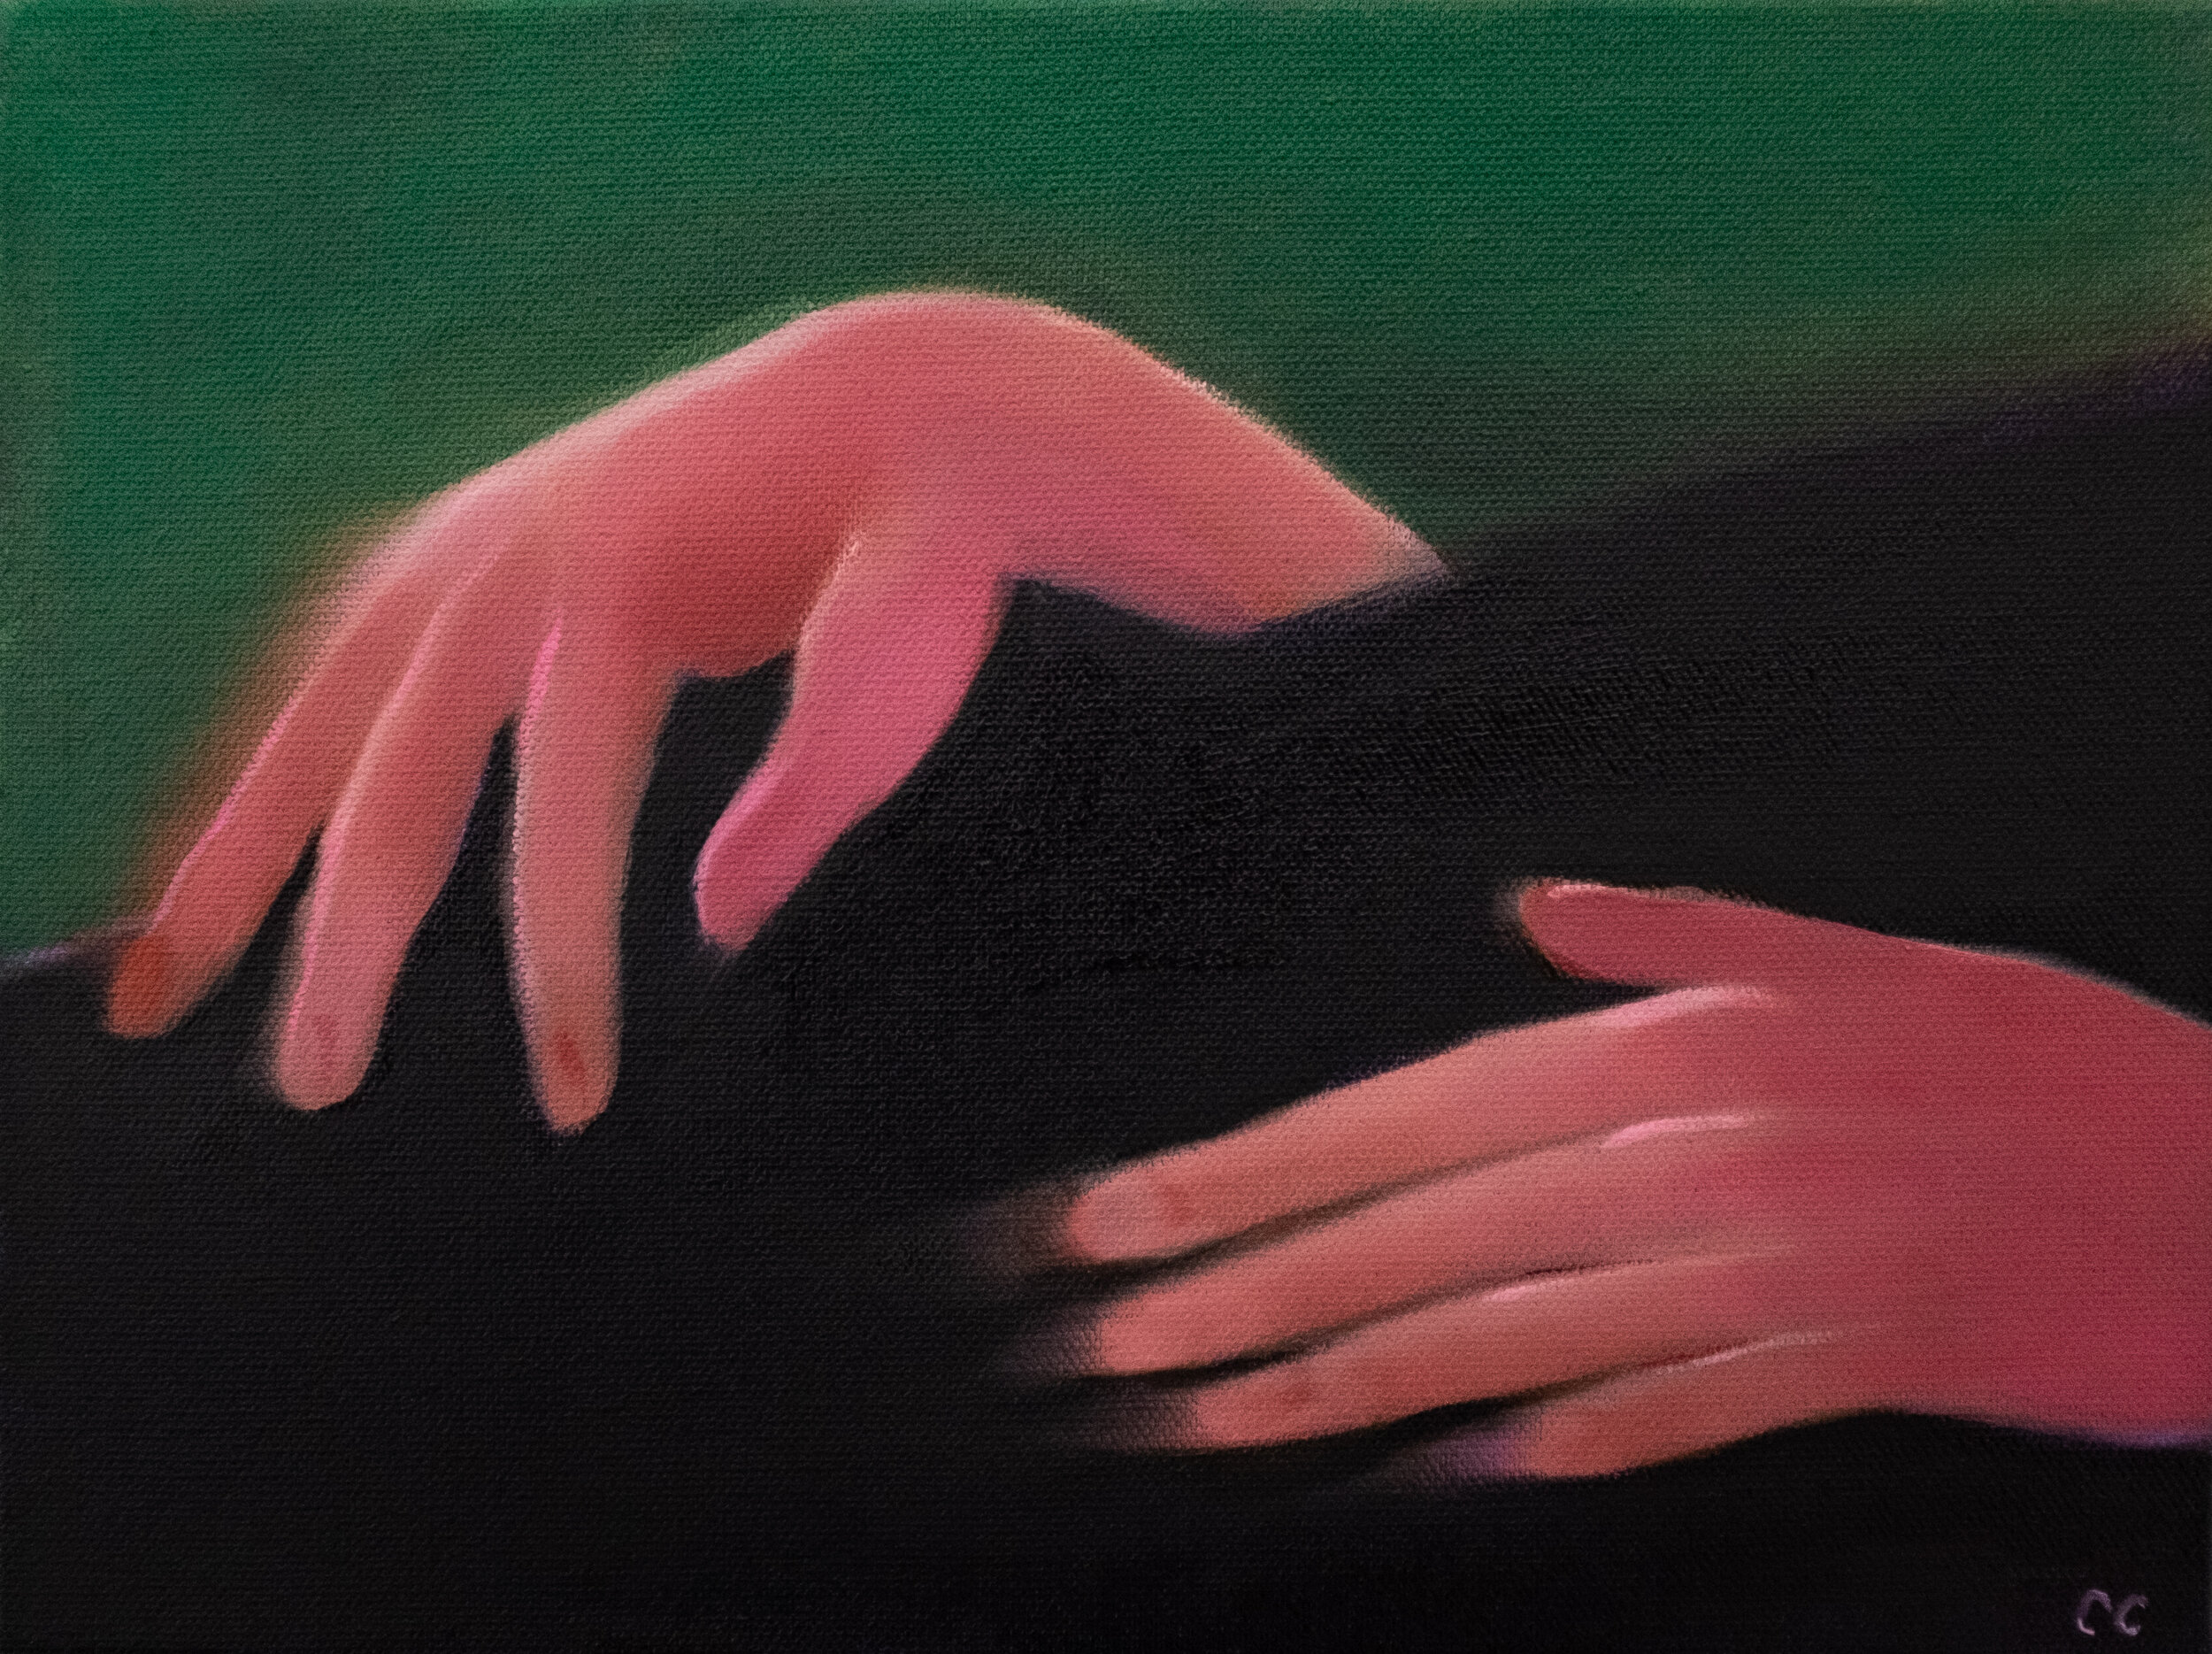  Cathleen Clarke,  Both Hands , 2021. Oil and acrylic on canvas, 9 x 12 inches. ©Cathleen Clarke, courtesy of Fou Gallery 